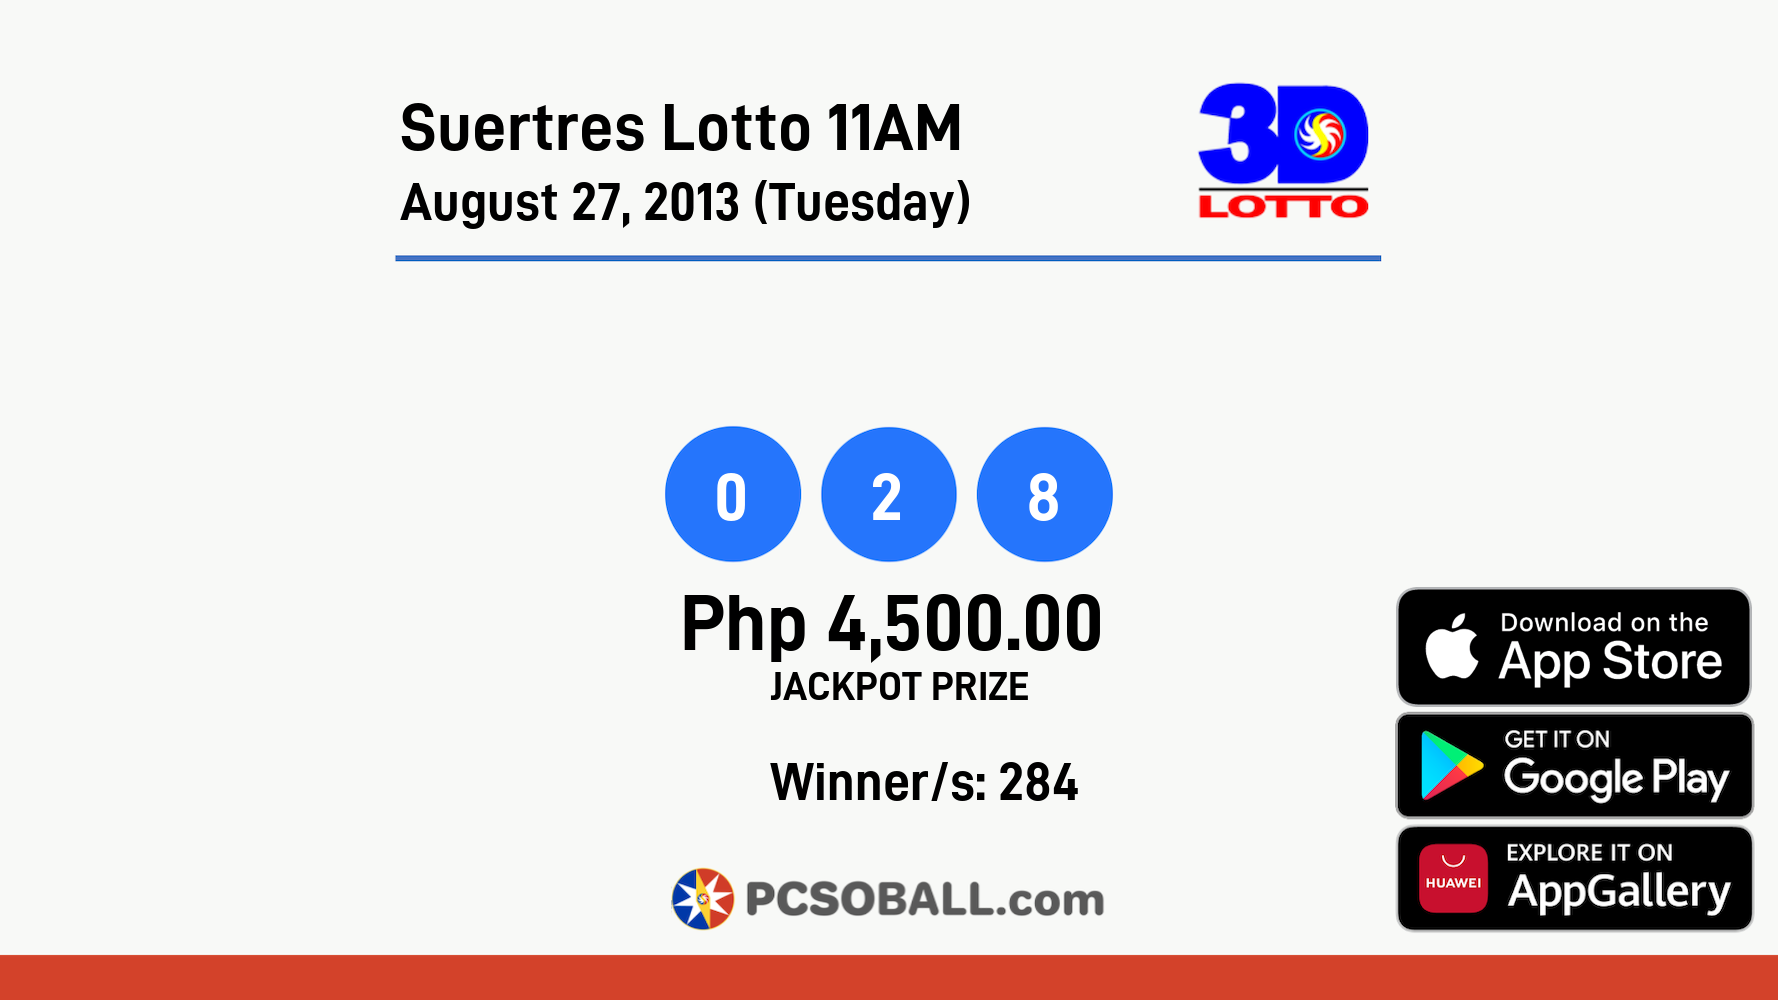 Suertres Lotto 11AM August 27, 2013 (Tuesday) Result